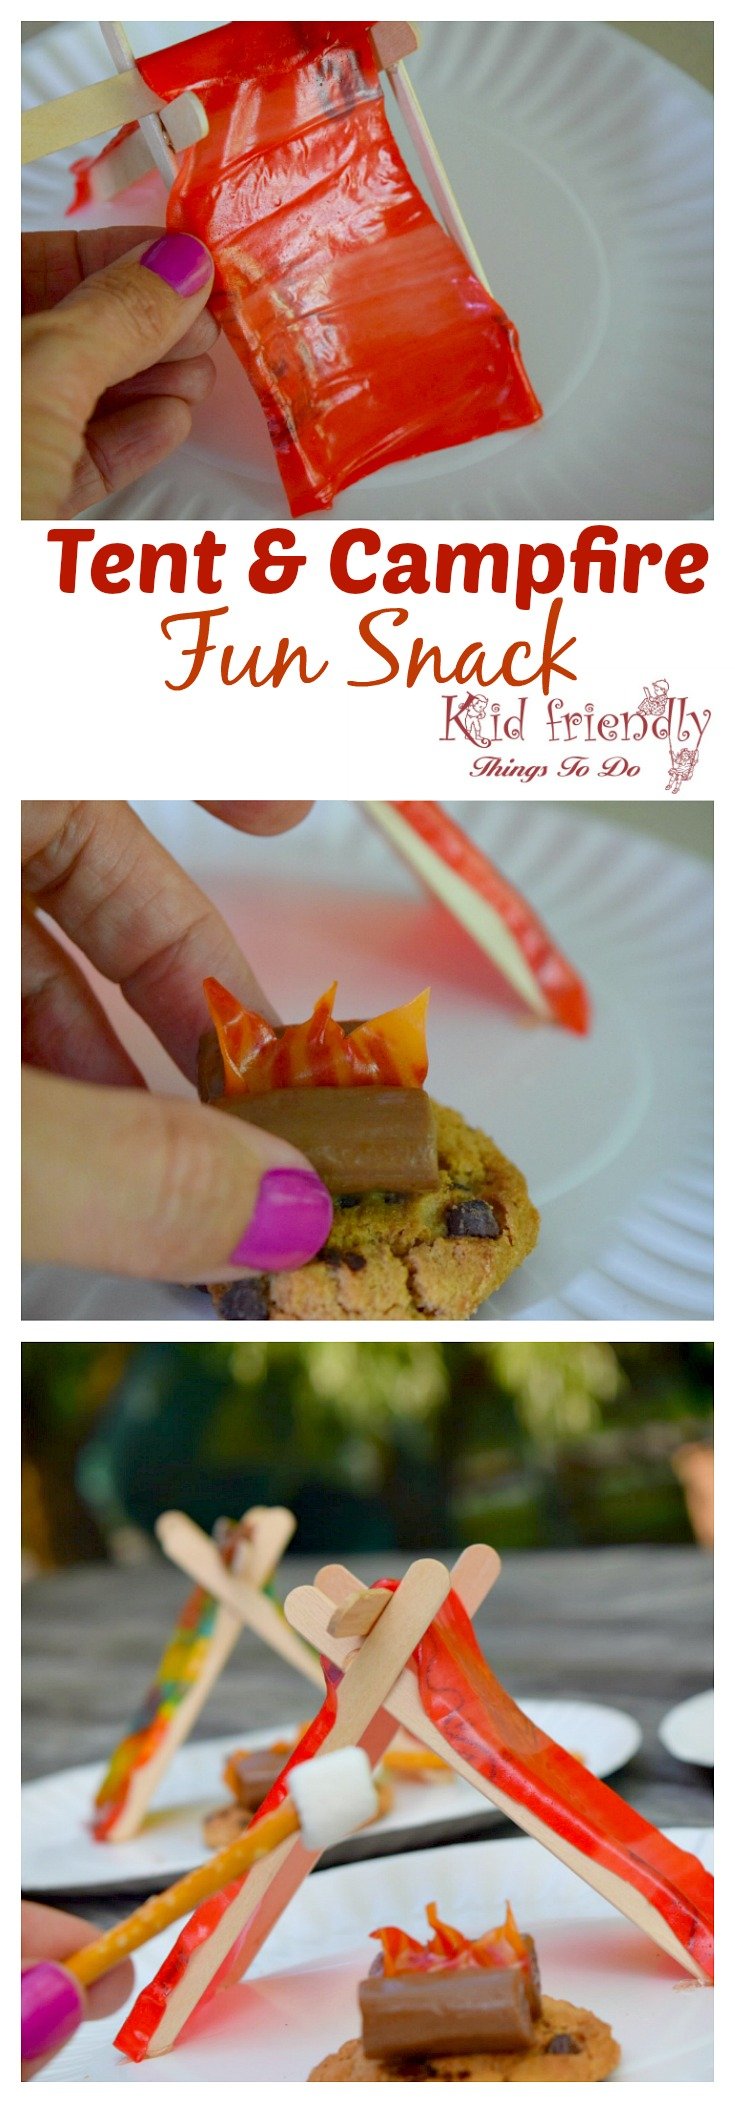 A Tent and Campfire Fun Food Idea for Kids - Perfect No Bake simple treat for camping, summer fun, boy scouts or girl scouts! www.kidfriendlythingstodo.com